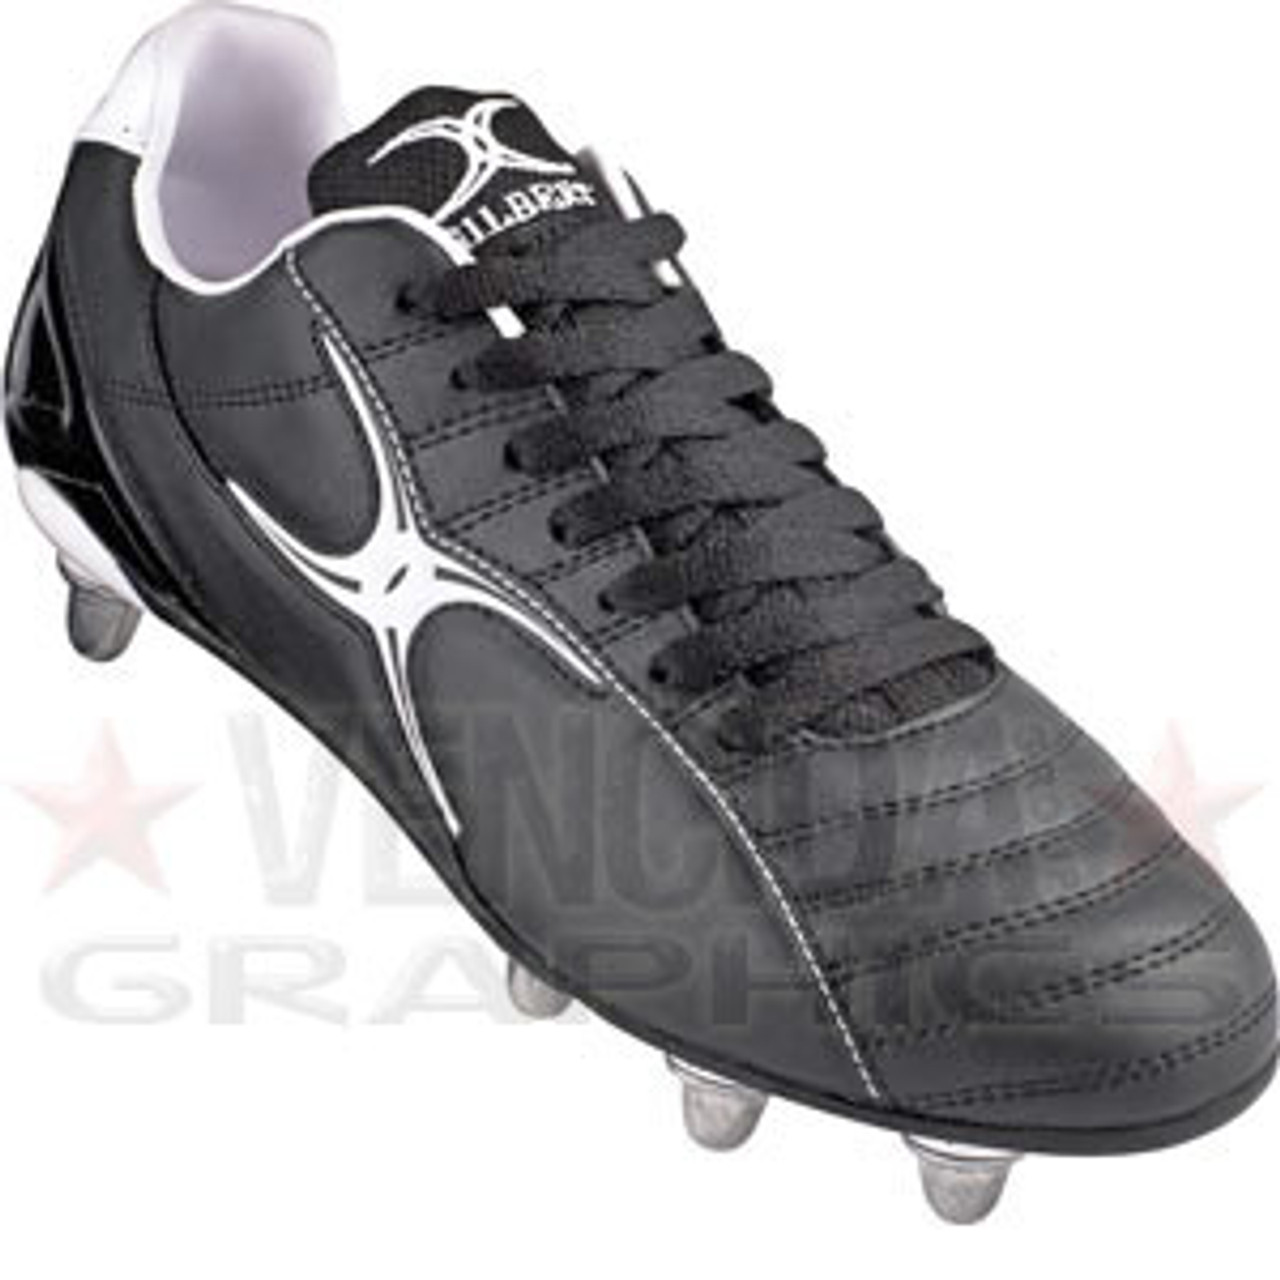 gilbert rugby shoes